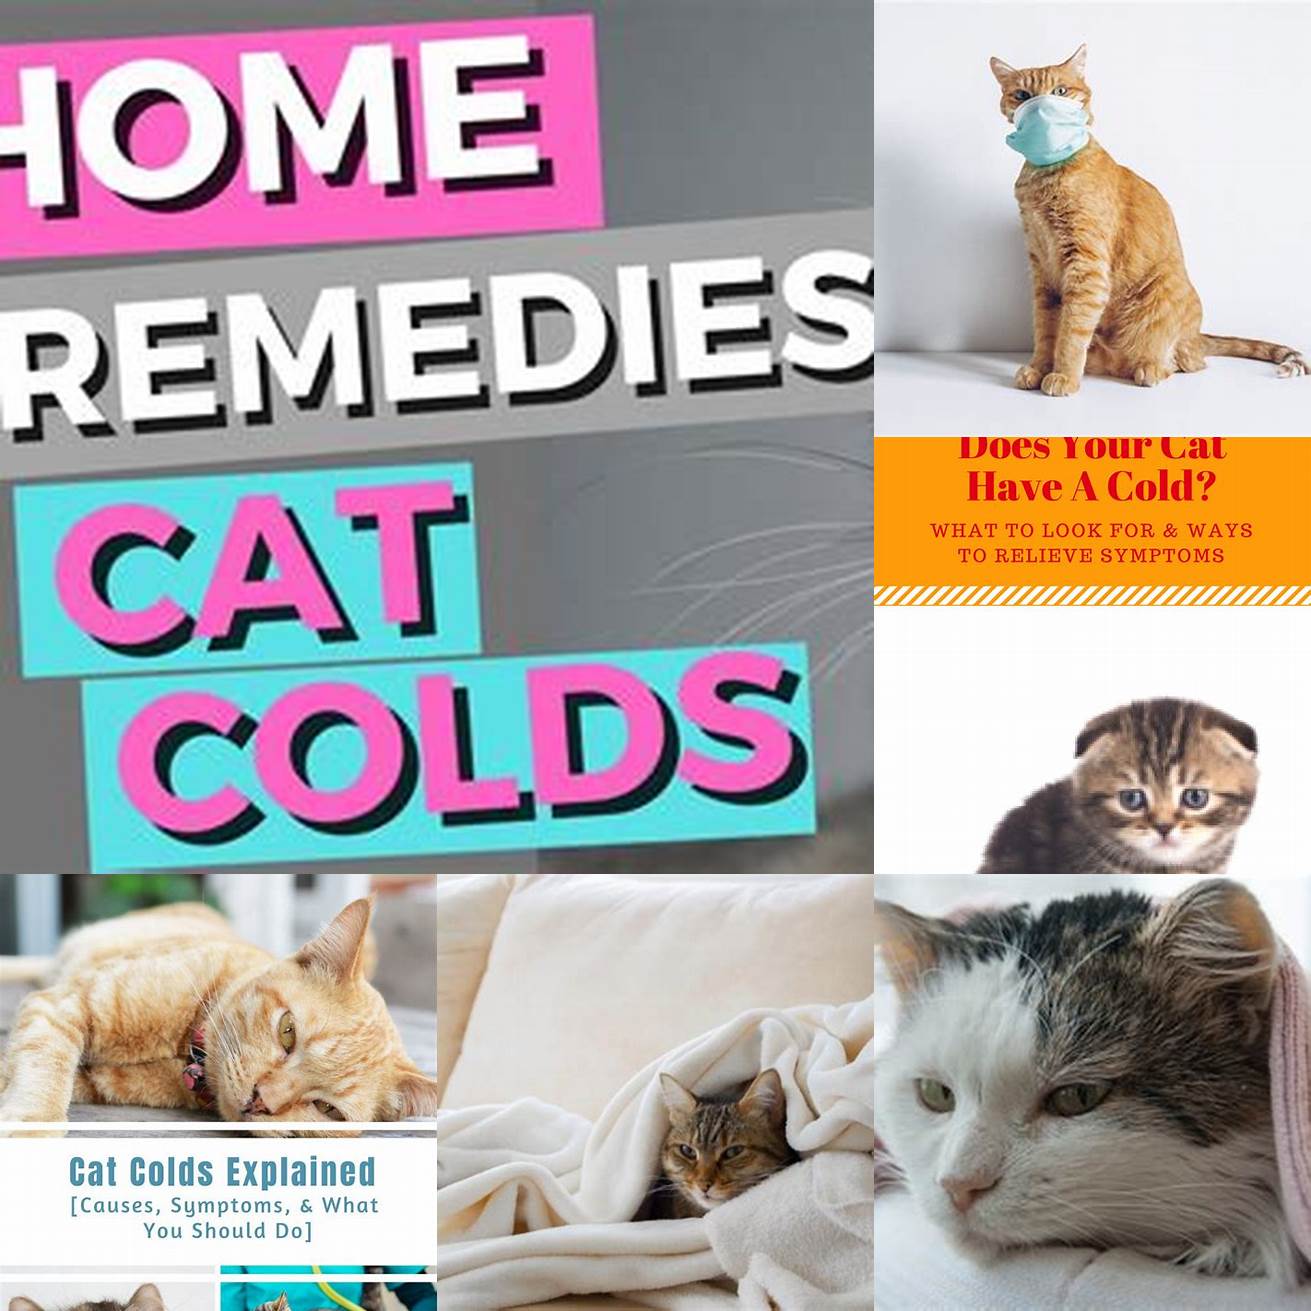 What are the symptoms of a cold in cats